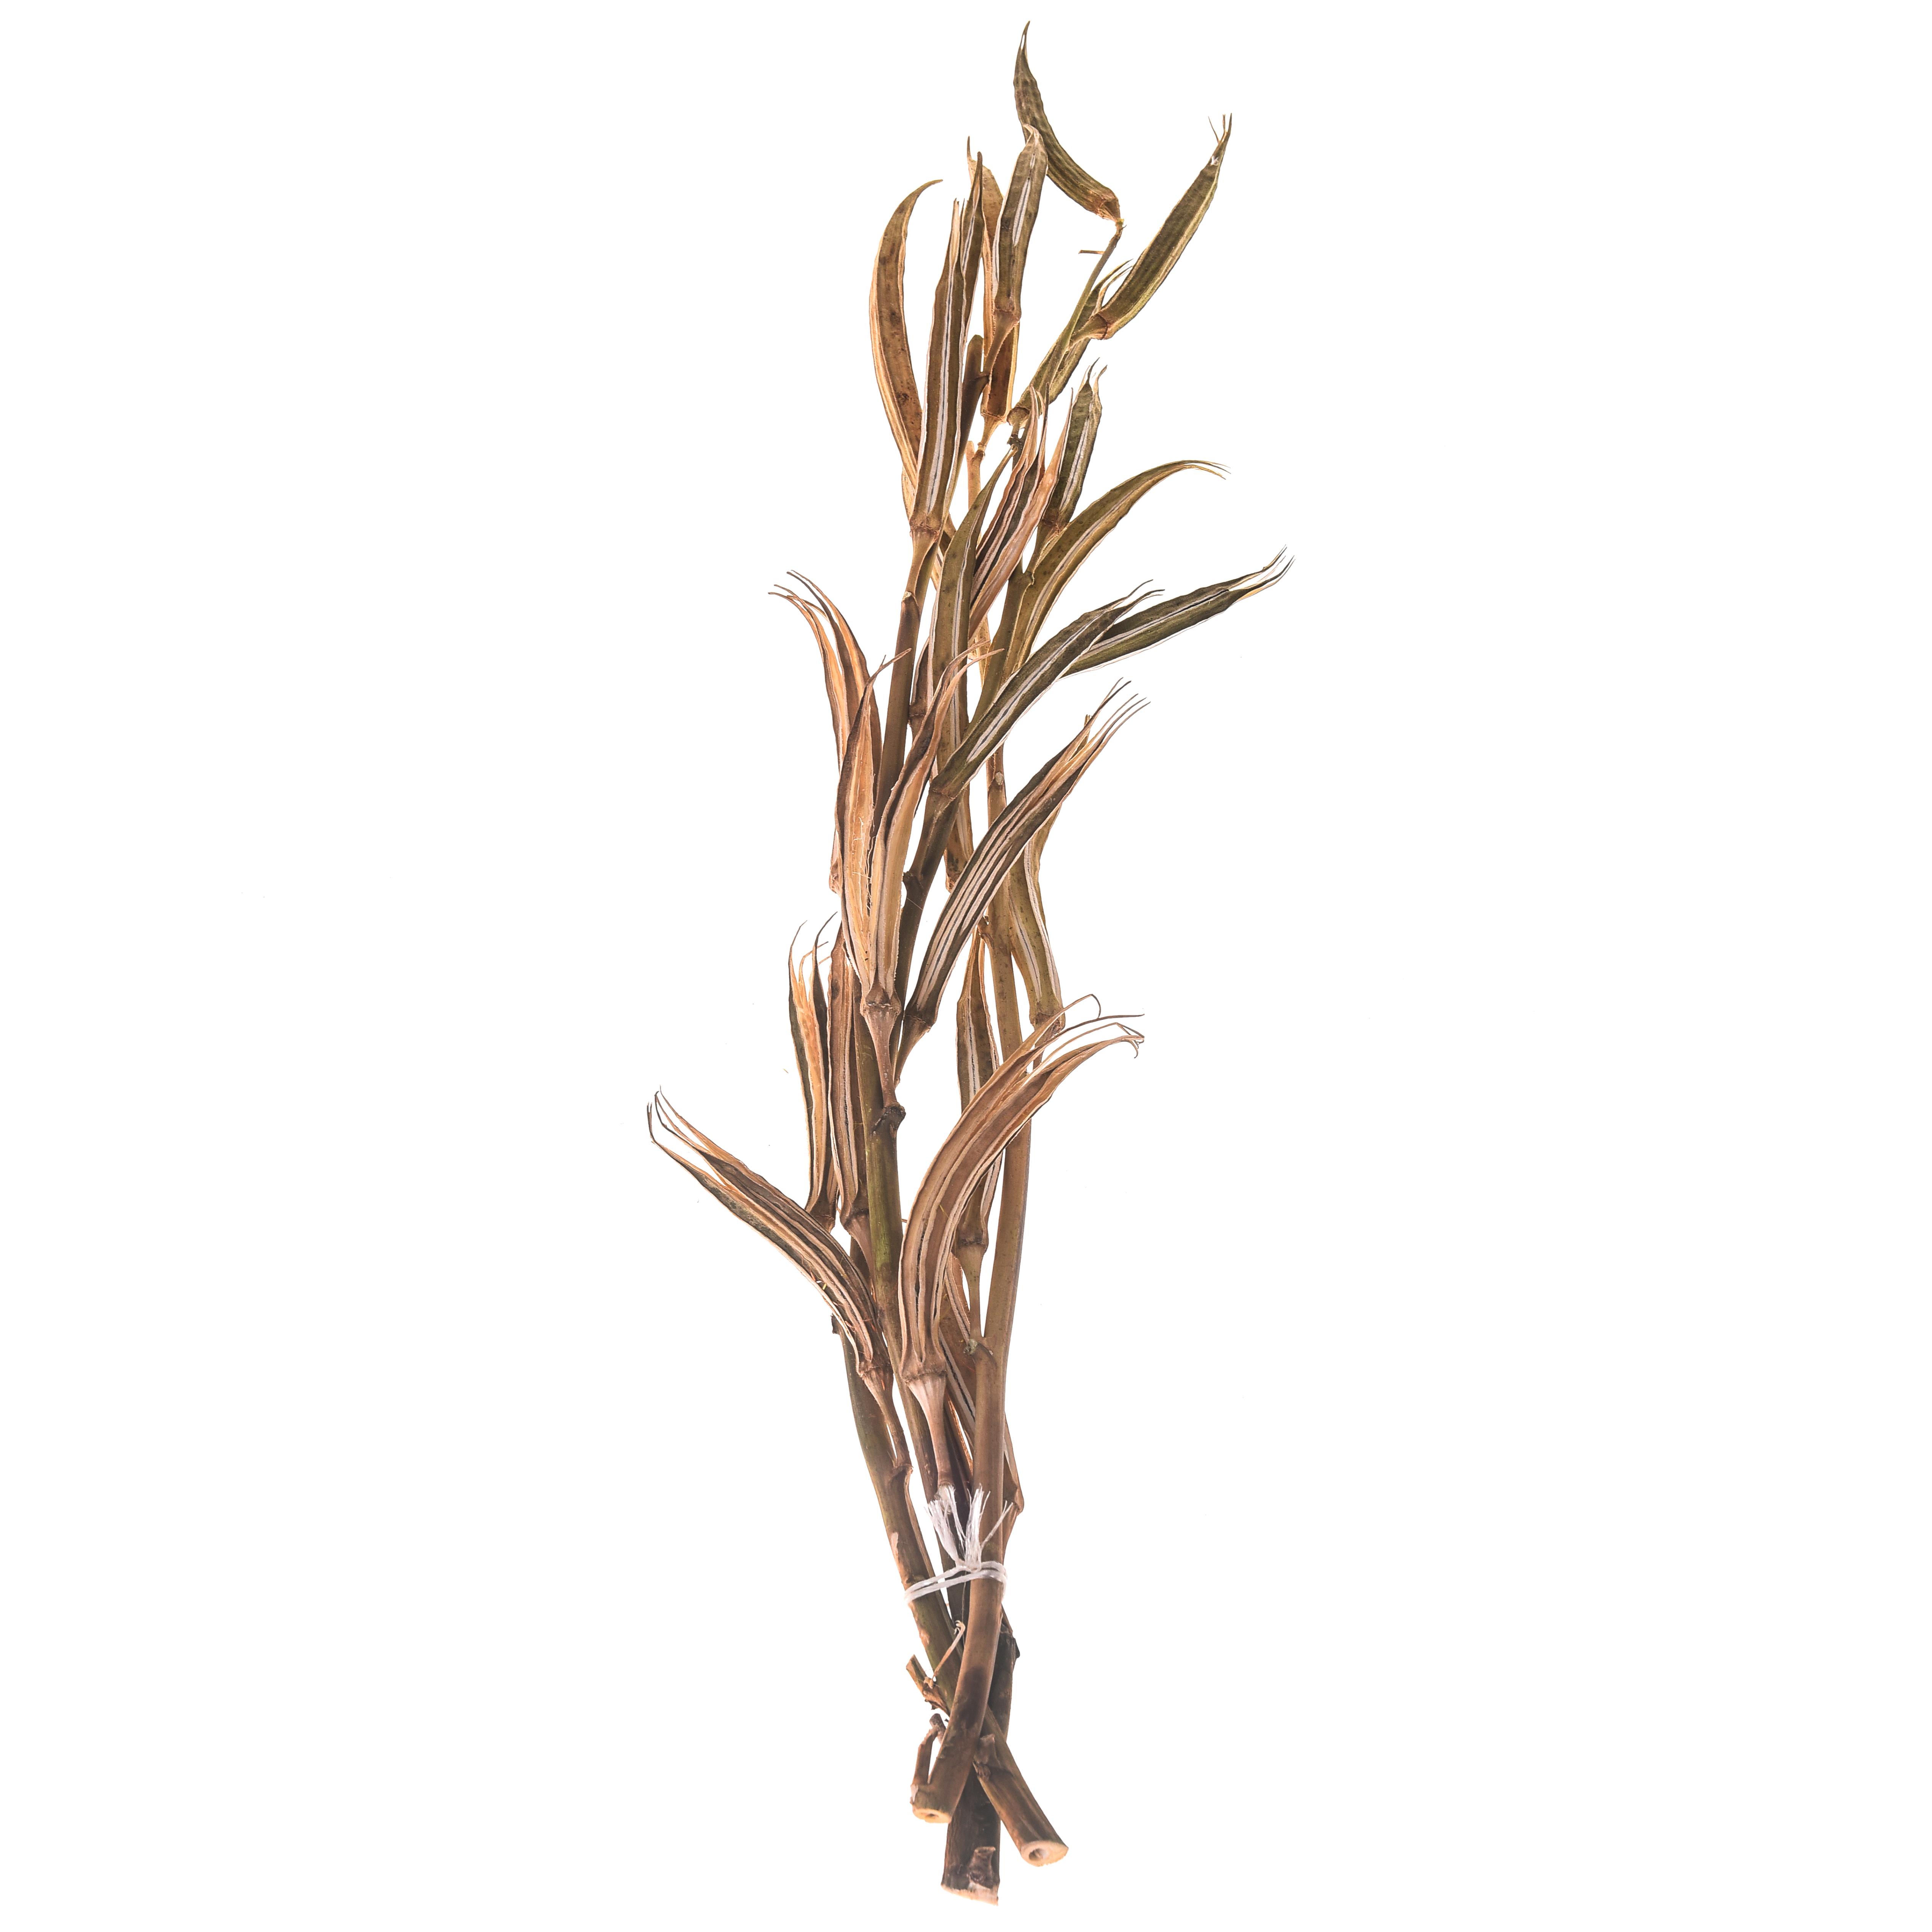 NATURAL PRODUCTS DRIED FLOWERS AND ERBS, EXOTICS AND DECORATION, OKURA 3 PZ NATURALE 95 CM NO SACCO